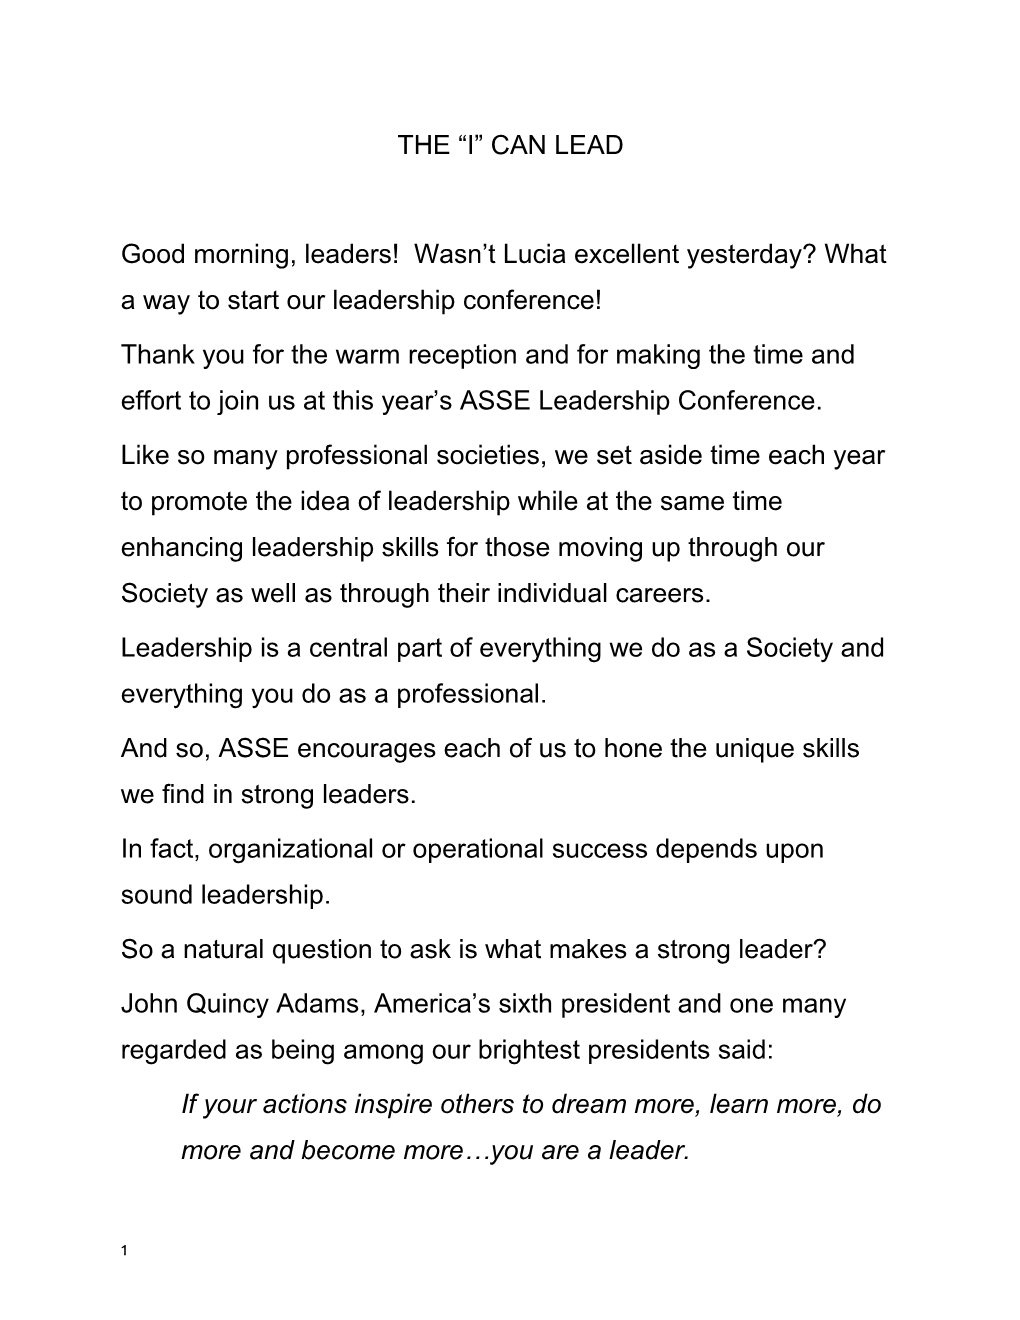 Good Morning, Leaders! Wasn T Lucia Excellent Yesterday? What a Way to Start Our Leadership